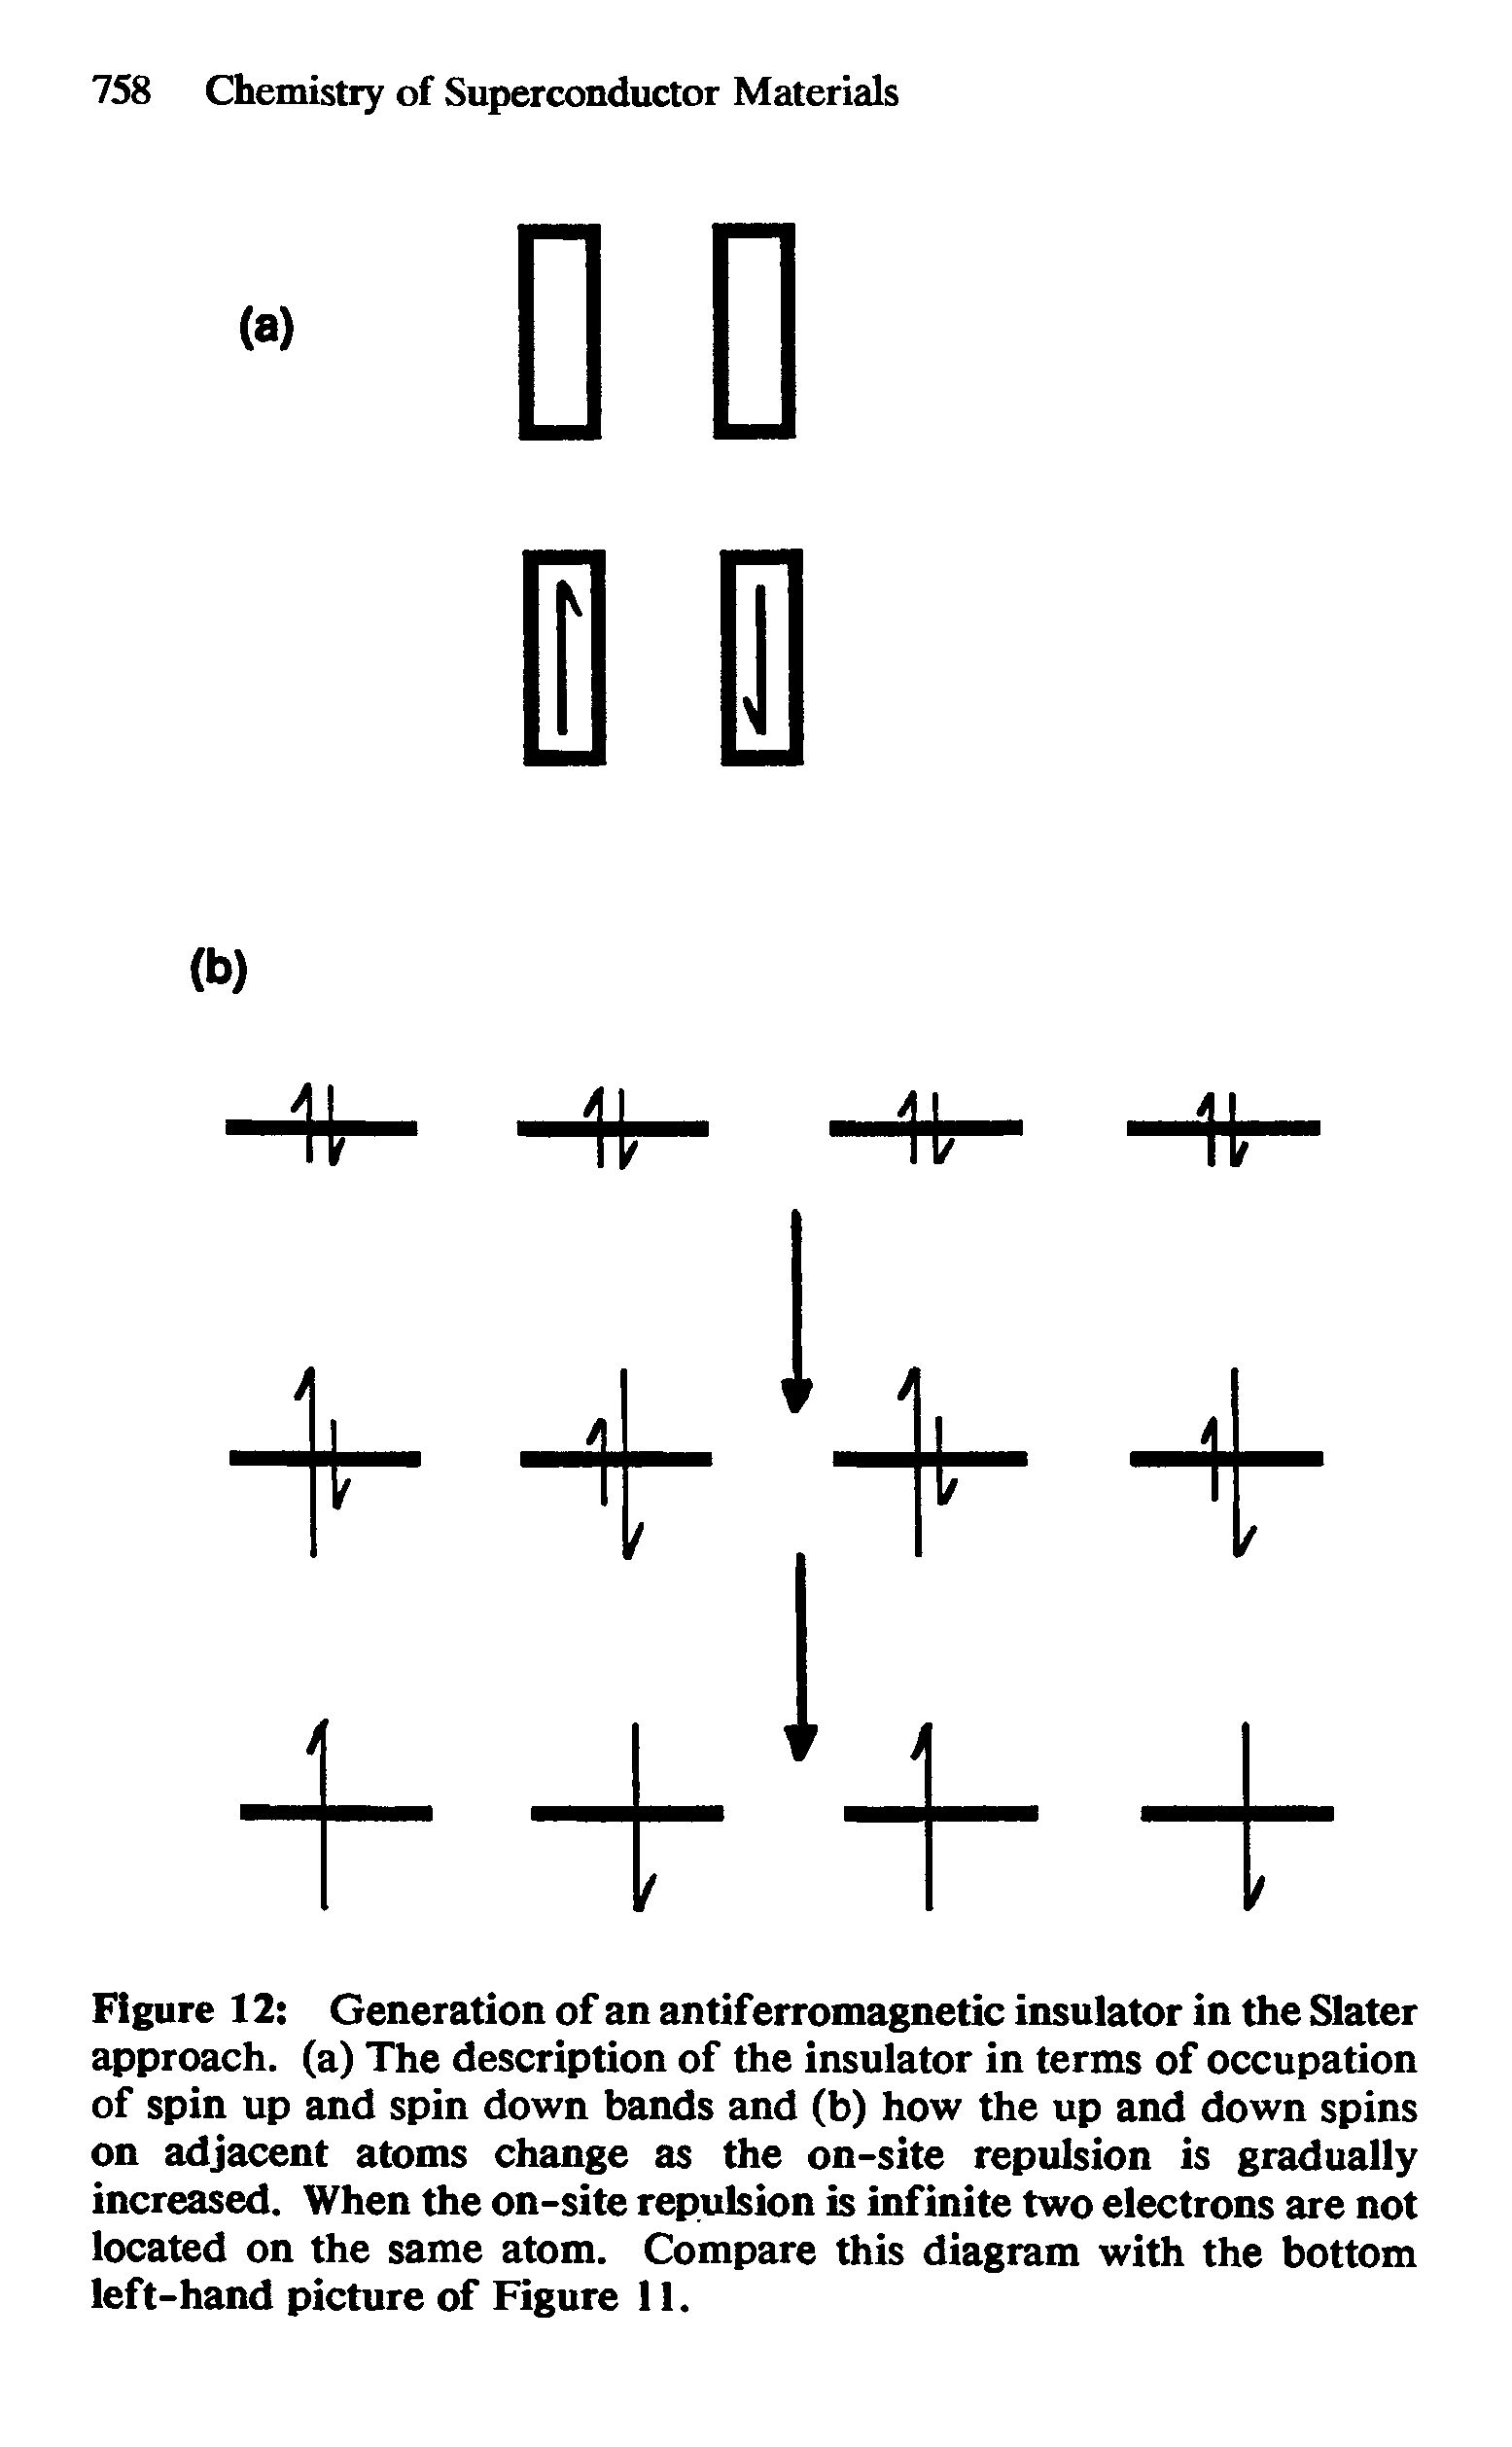 Figure 12 Generation of an antiferromagnetic insulator in the Slater approach, (a) The description of the insulator in terms of occupation of spin up and spin down bands and (b) how the up and down spins on adjacent atoms change as the on-site repulsion is gradually increased. When the on-site repulsion is infinite two electrons are not located on the same atom. Compare this diagram with the bottom left-hand picture of Figure 11.